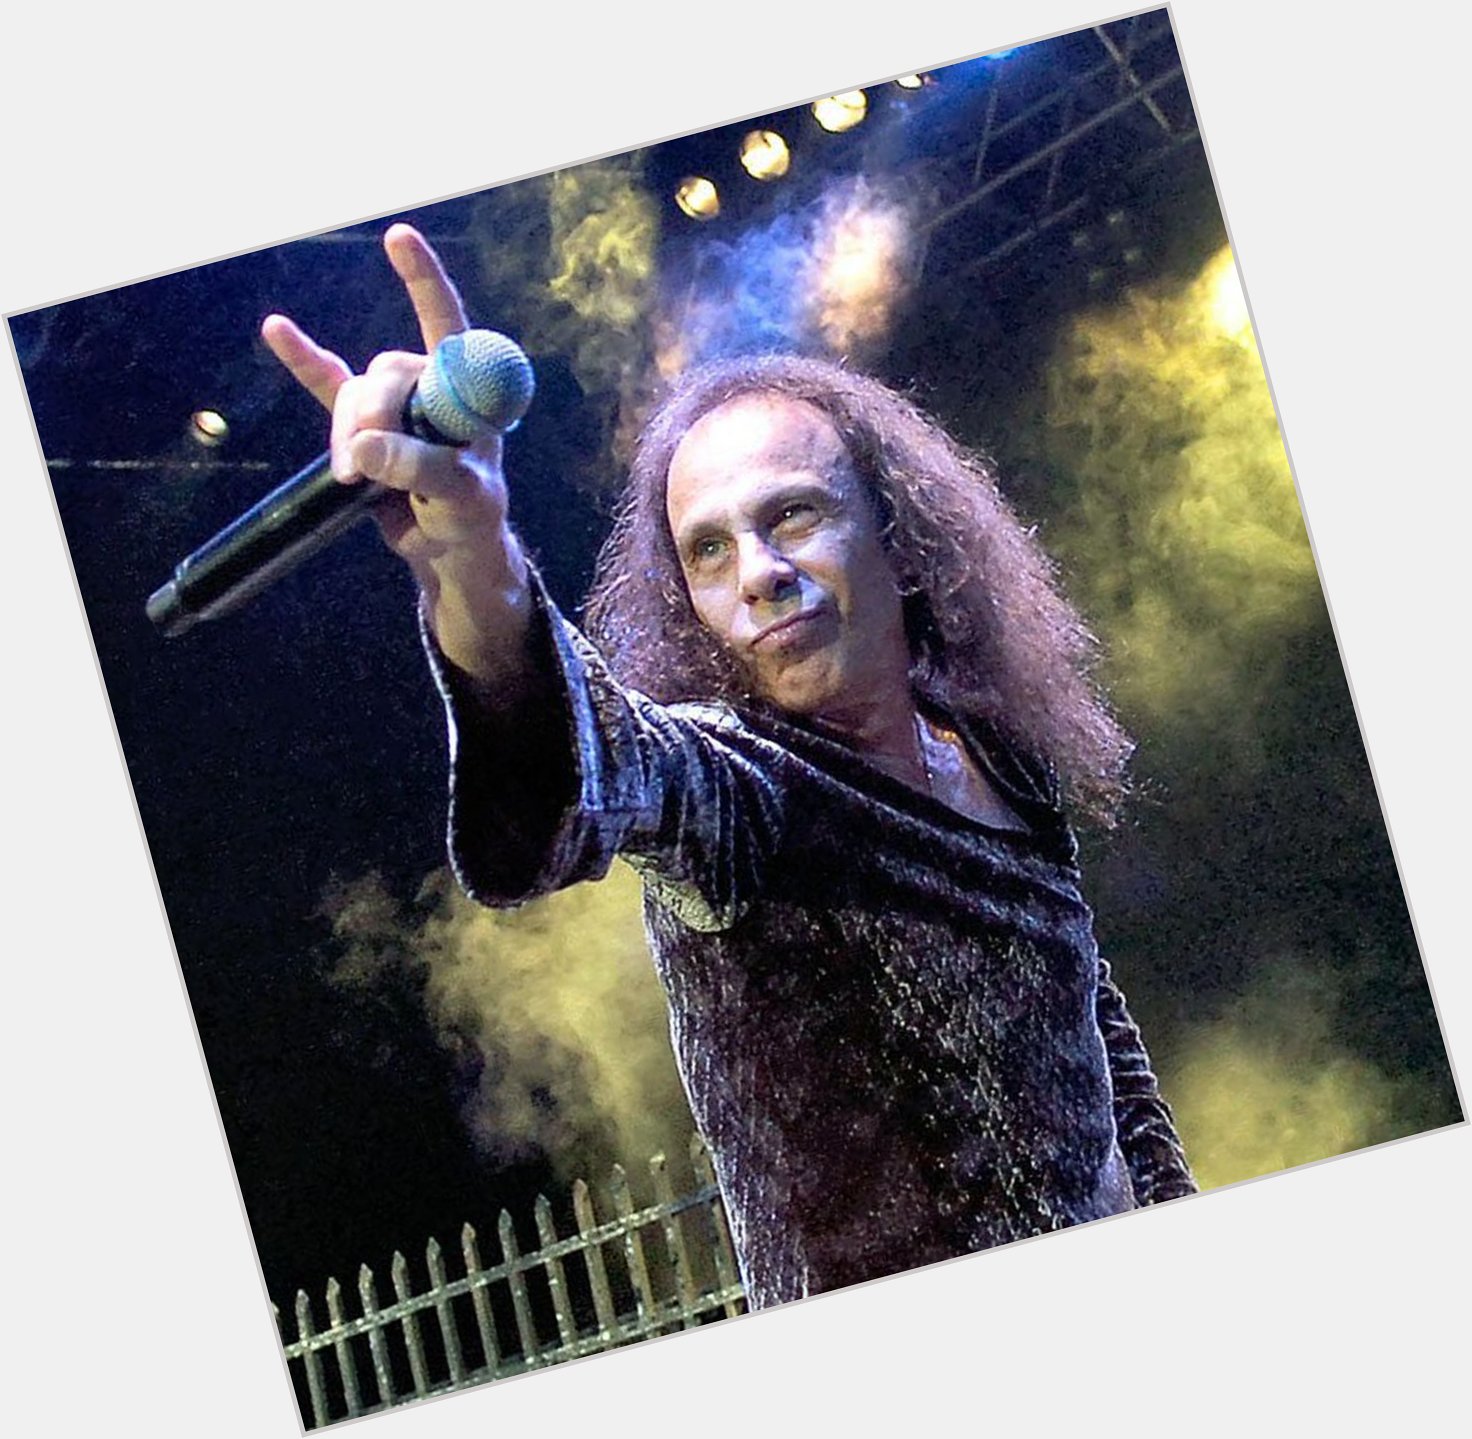 Happy Birthday to Ronnie James Dio, one of the greatest voices, and minds, to ever grace heavy metal. 